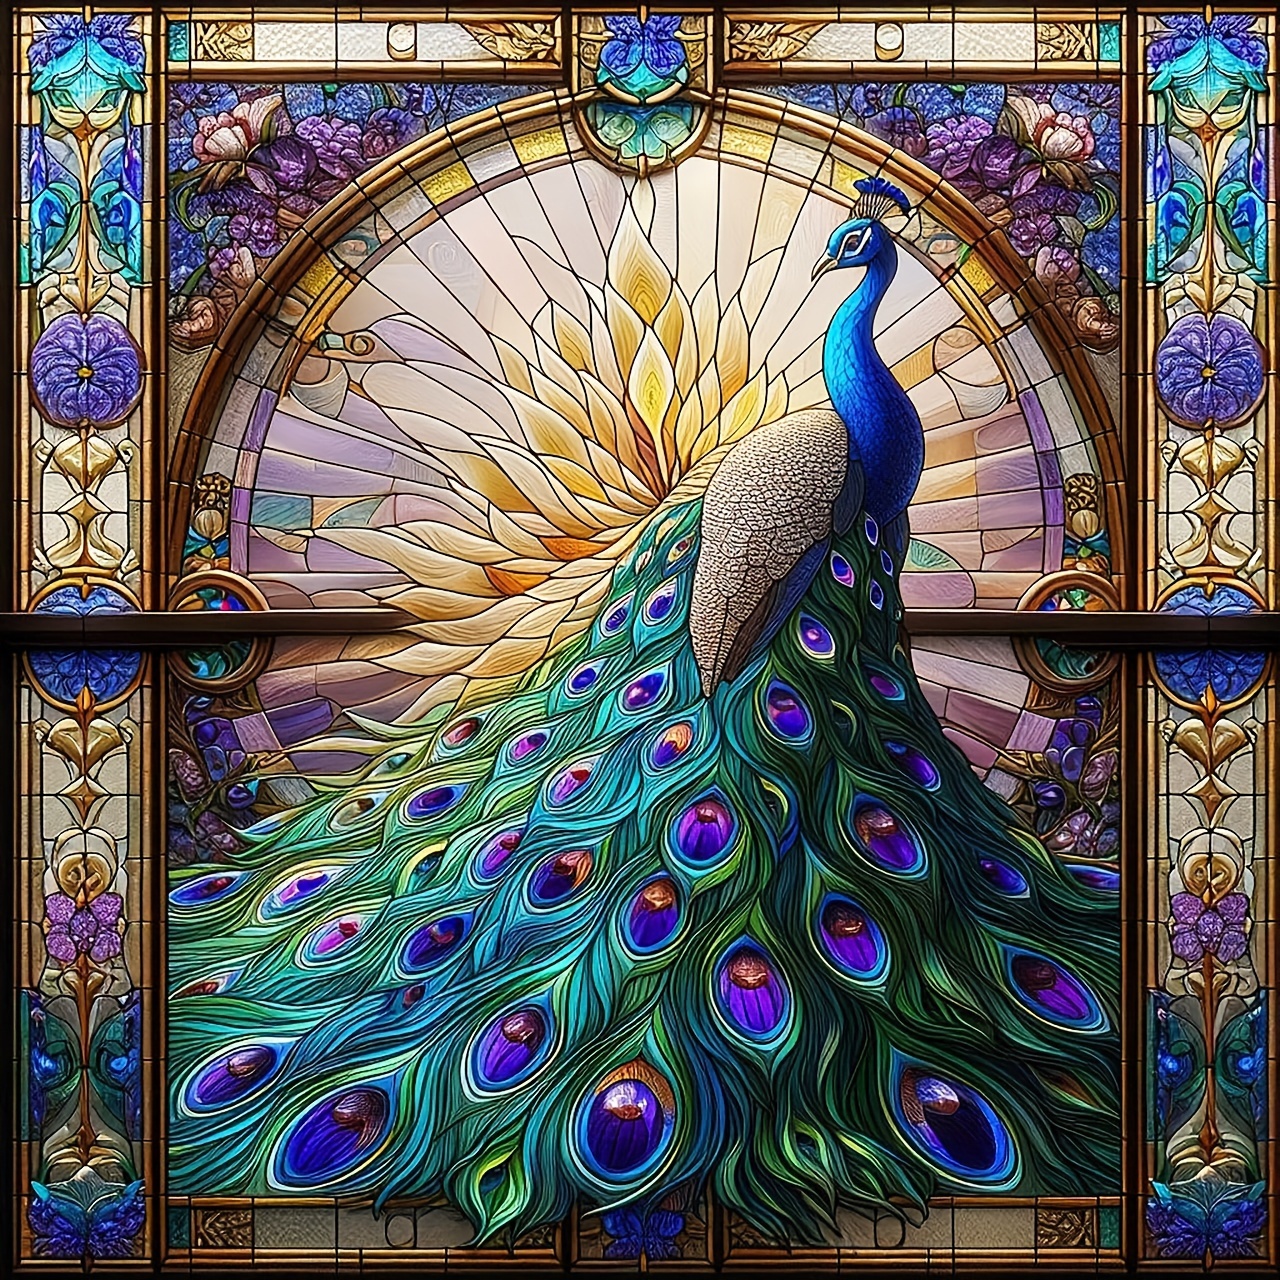 

1pc 40x40cm/15.7x15.7in Diy 5d Diamond Art Painting Without Frame, Beautiful Peacock Full Rhinestone Painting, Diamond Art Painting Embroidery Kit, Handmade Home Room Office Wall Decor